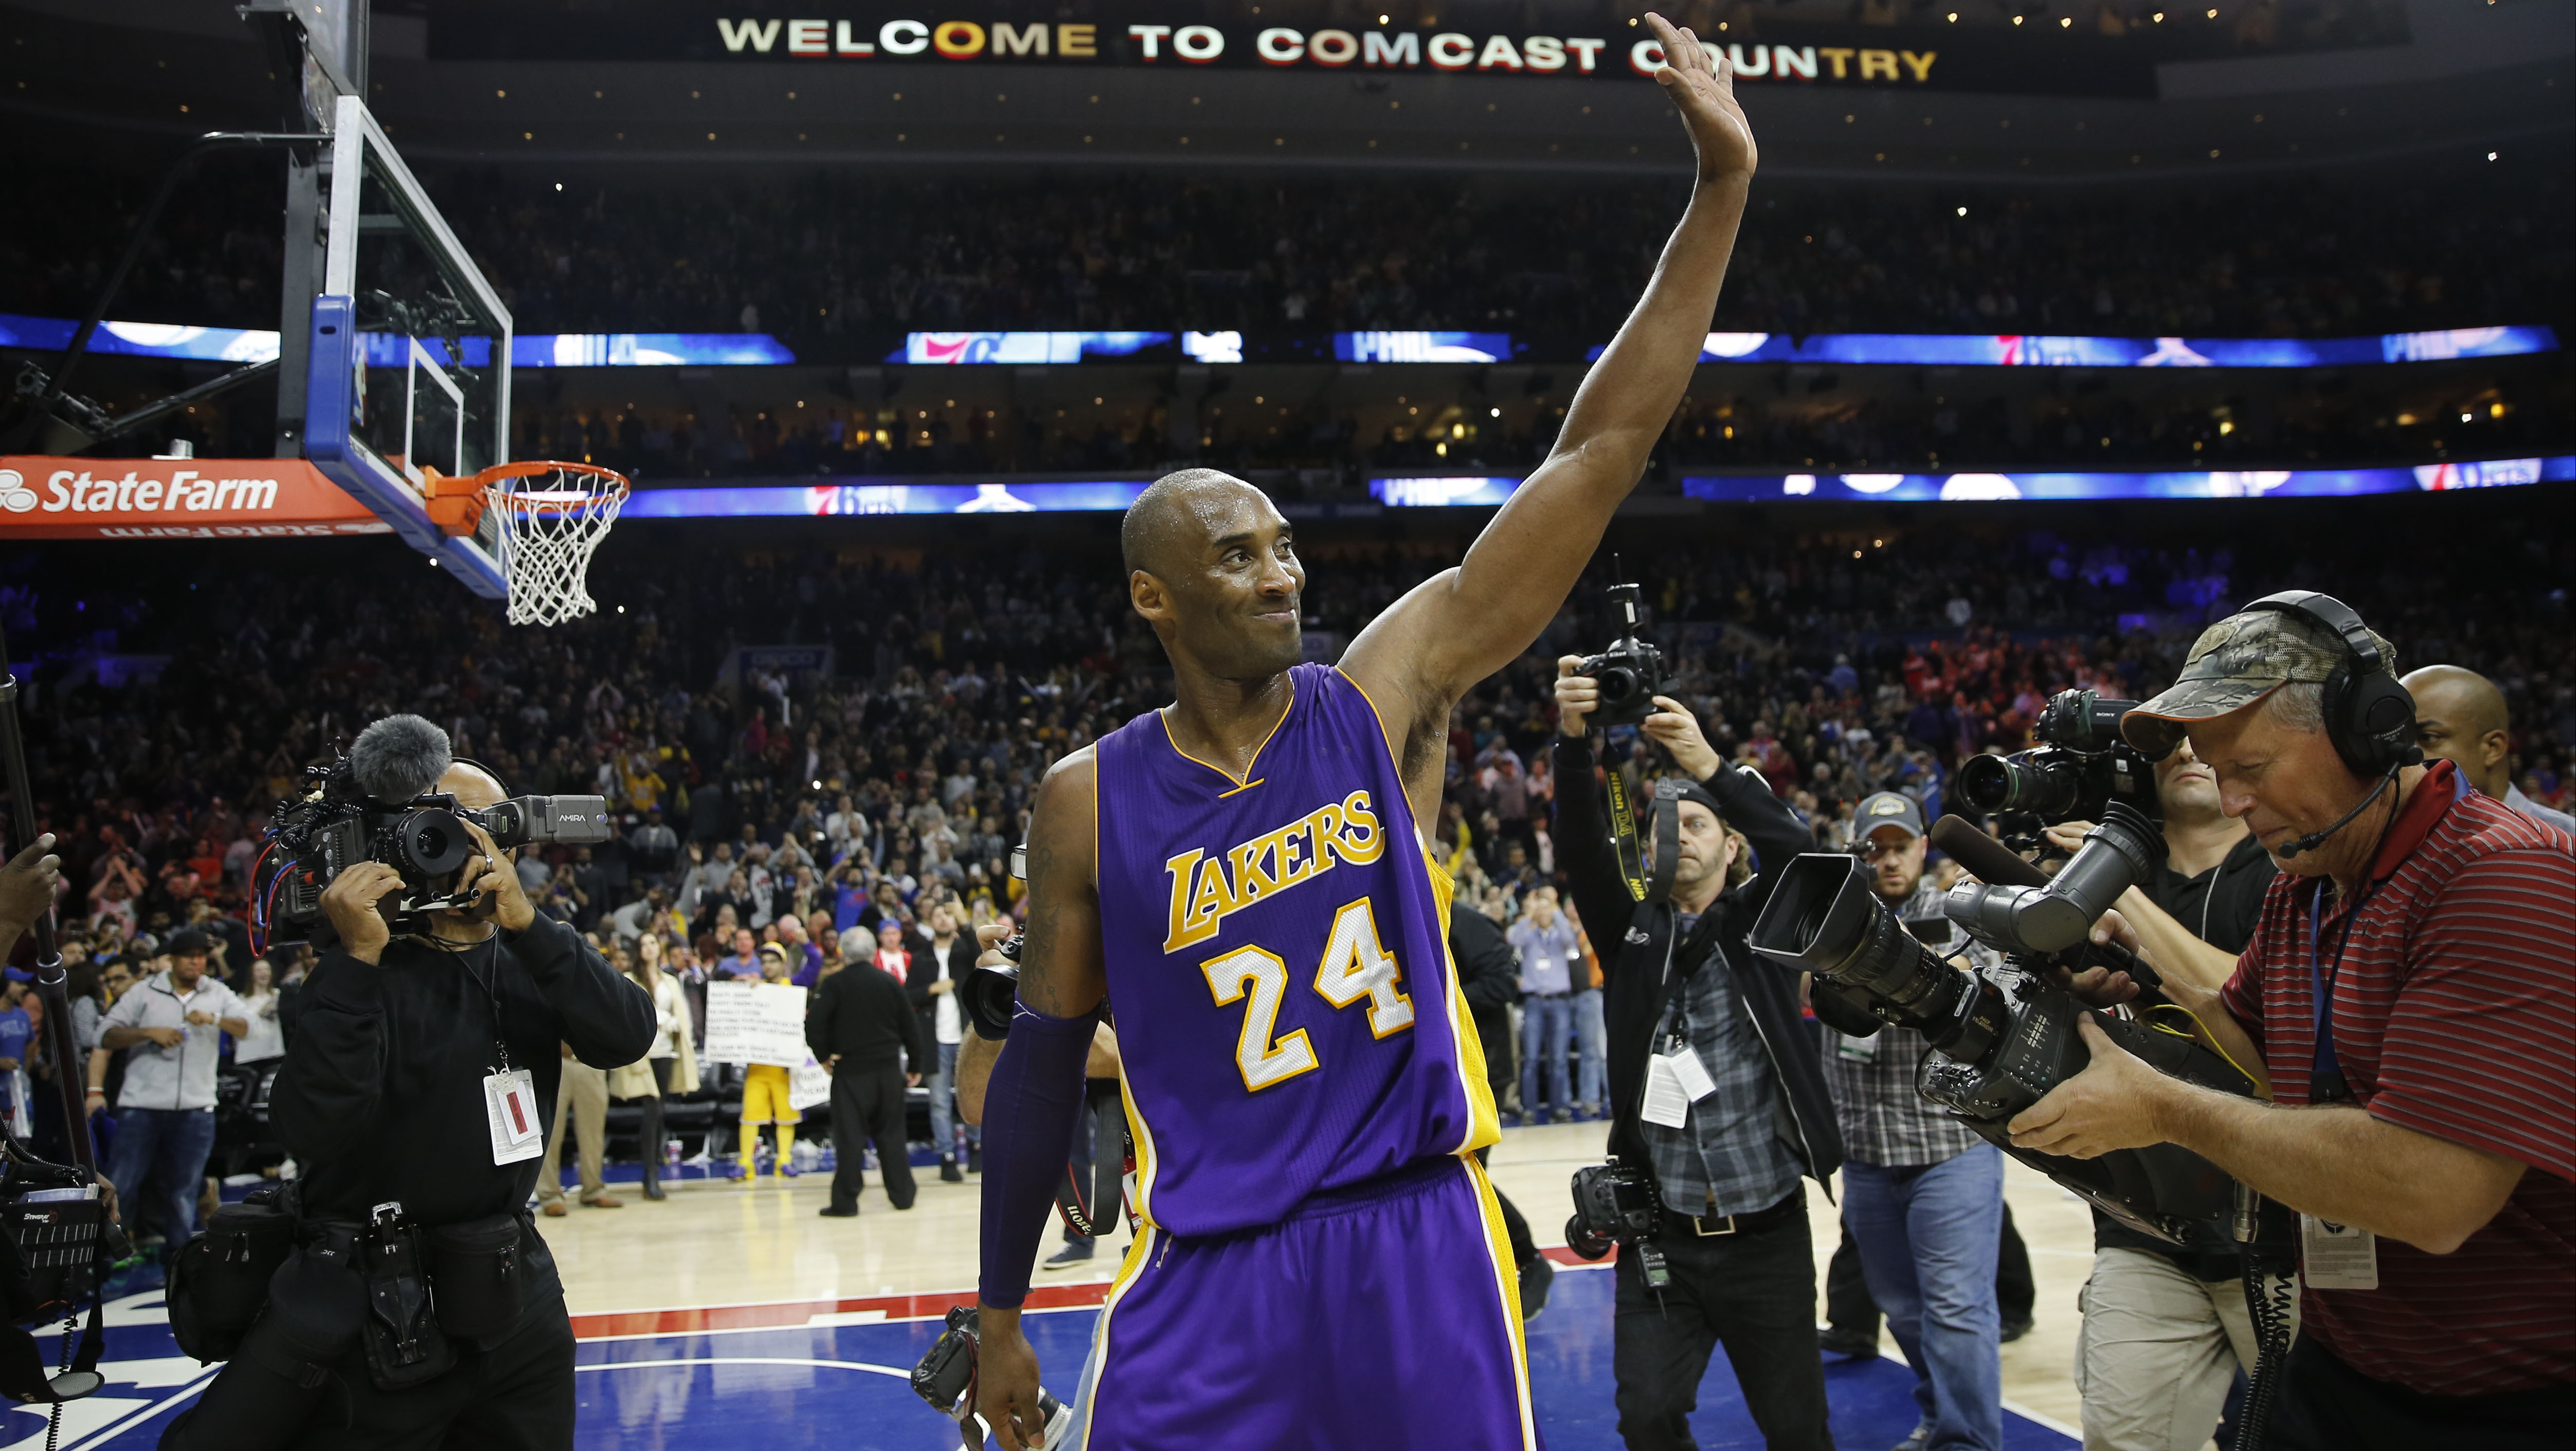 NBA - Kobe Bryant #24 of the Los Angeles Lakers adjusts his jersey